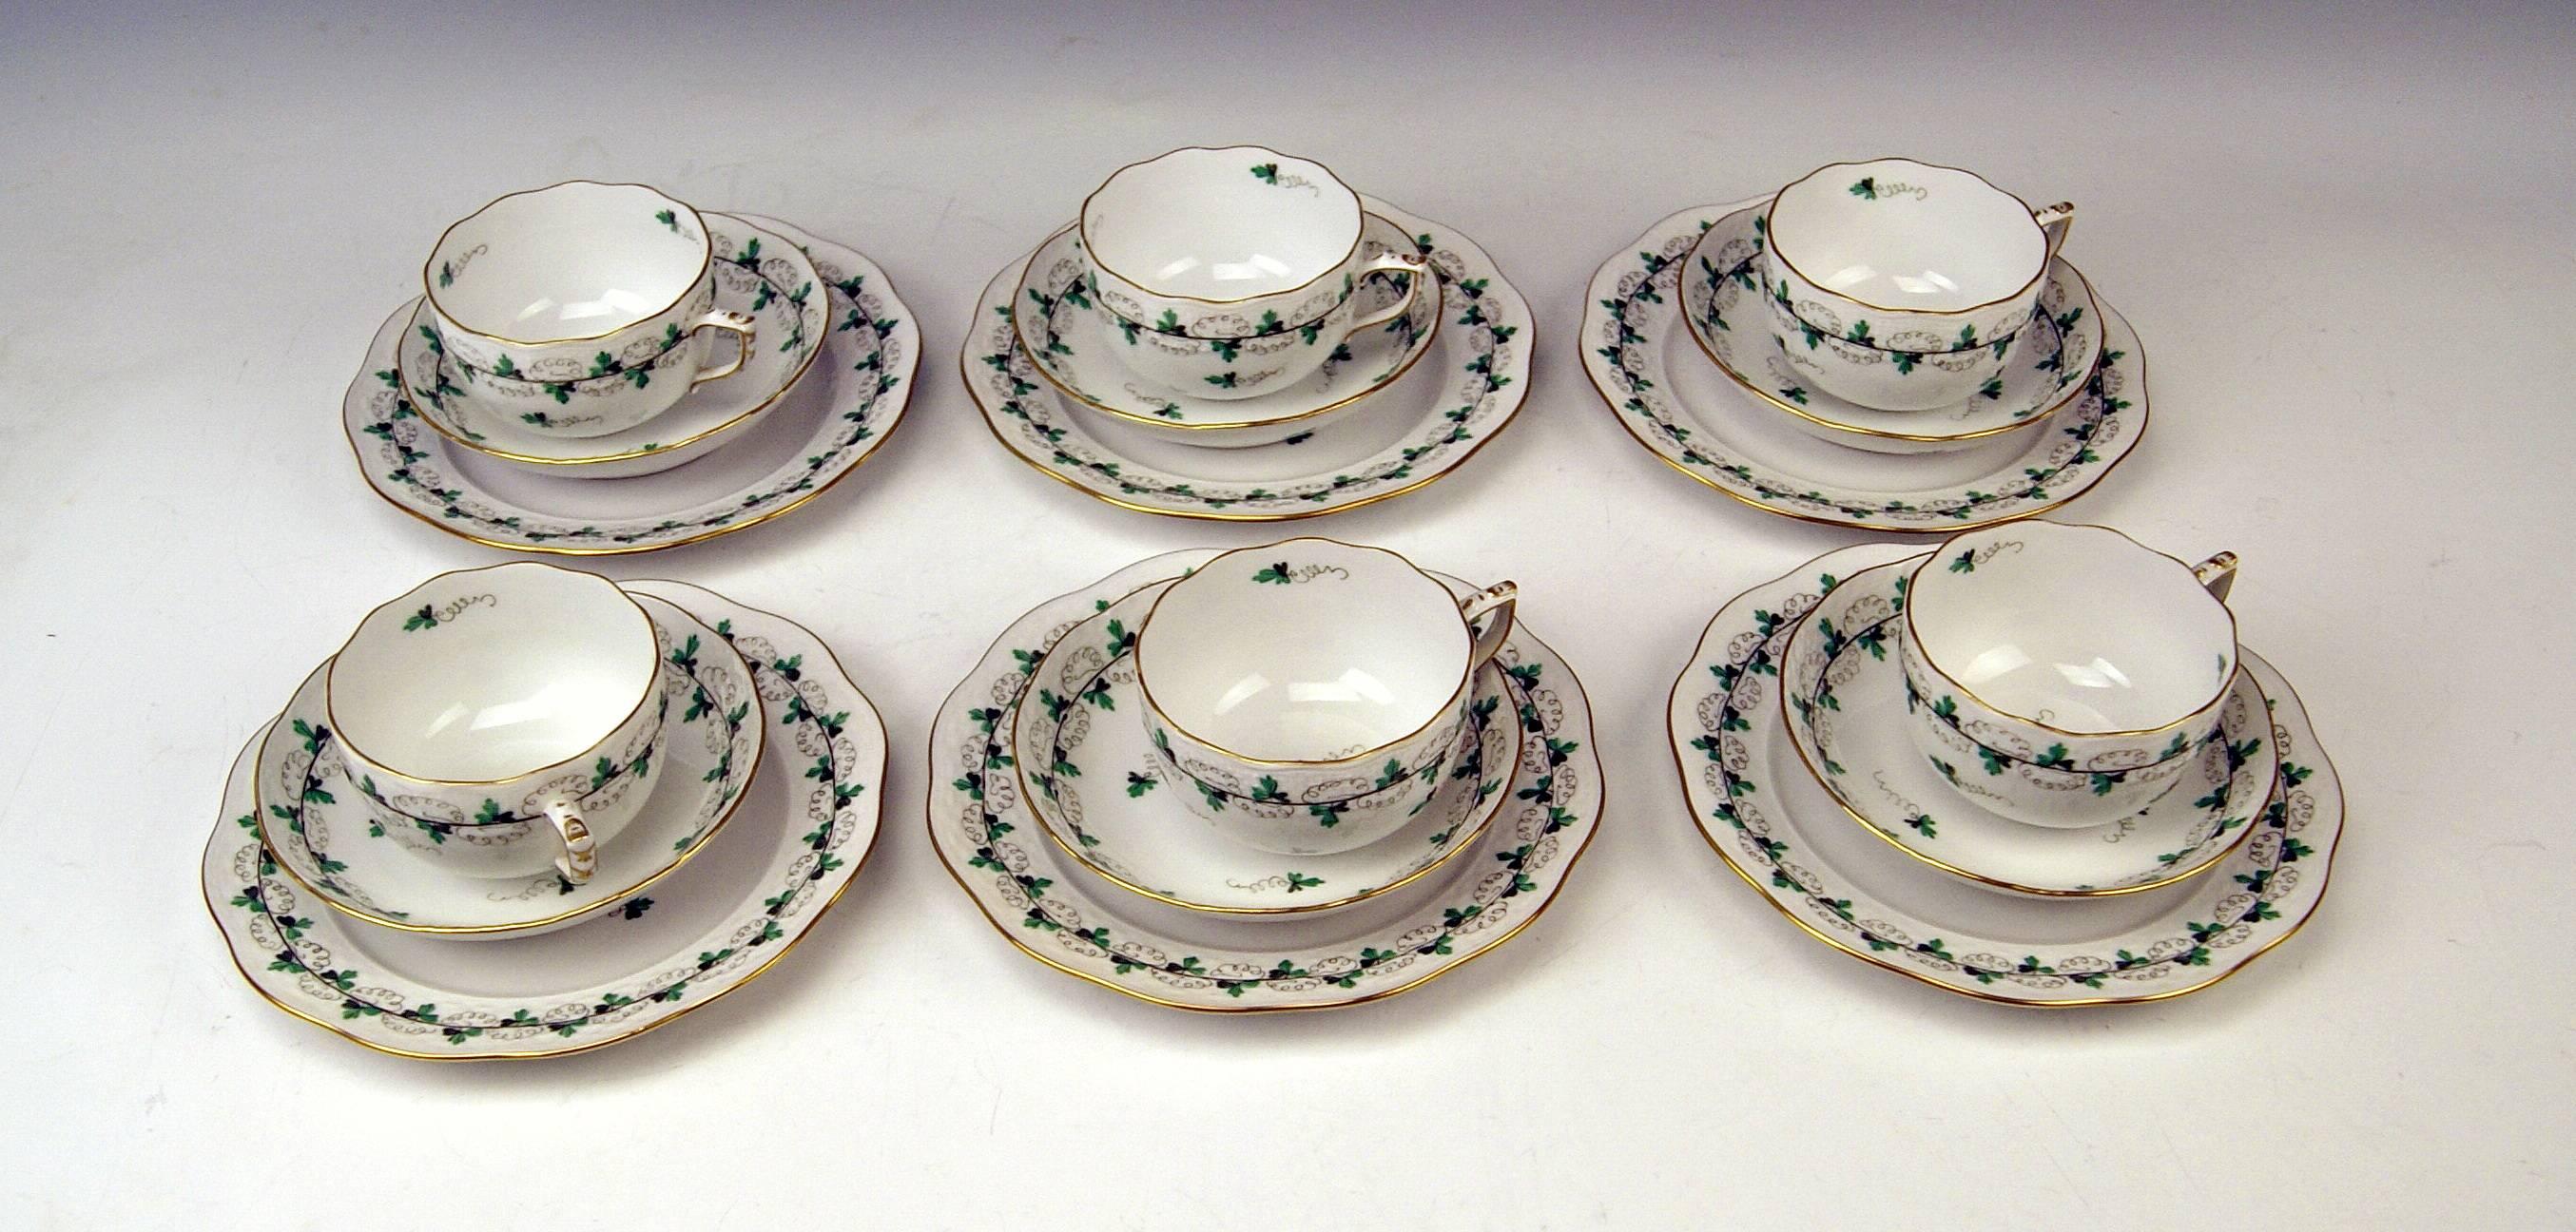 20th Century Herend Coffee Set for Six Persons Decor Persil, circa 1960